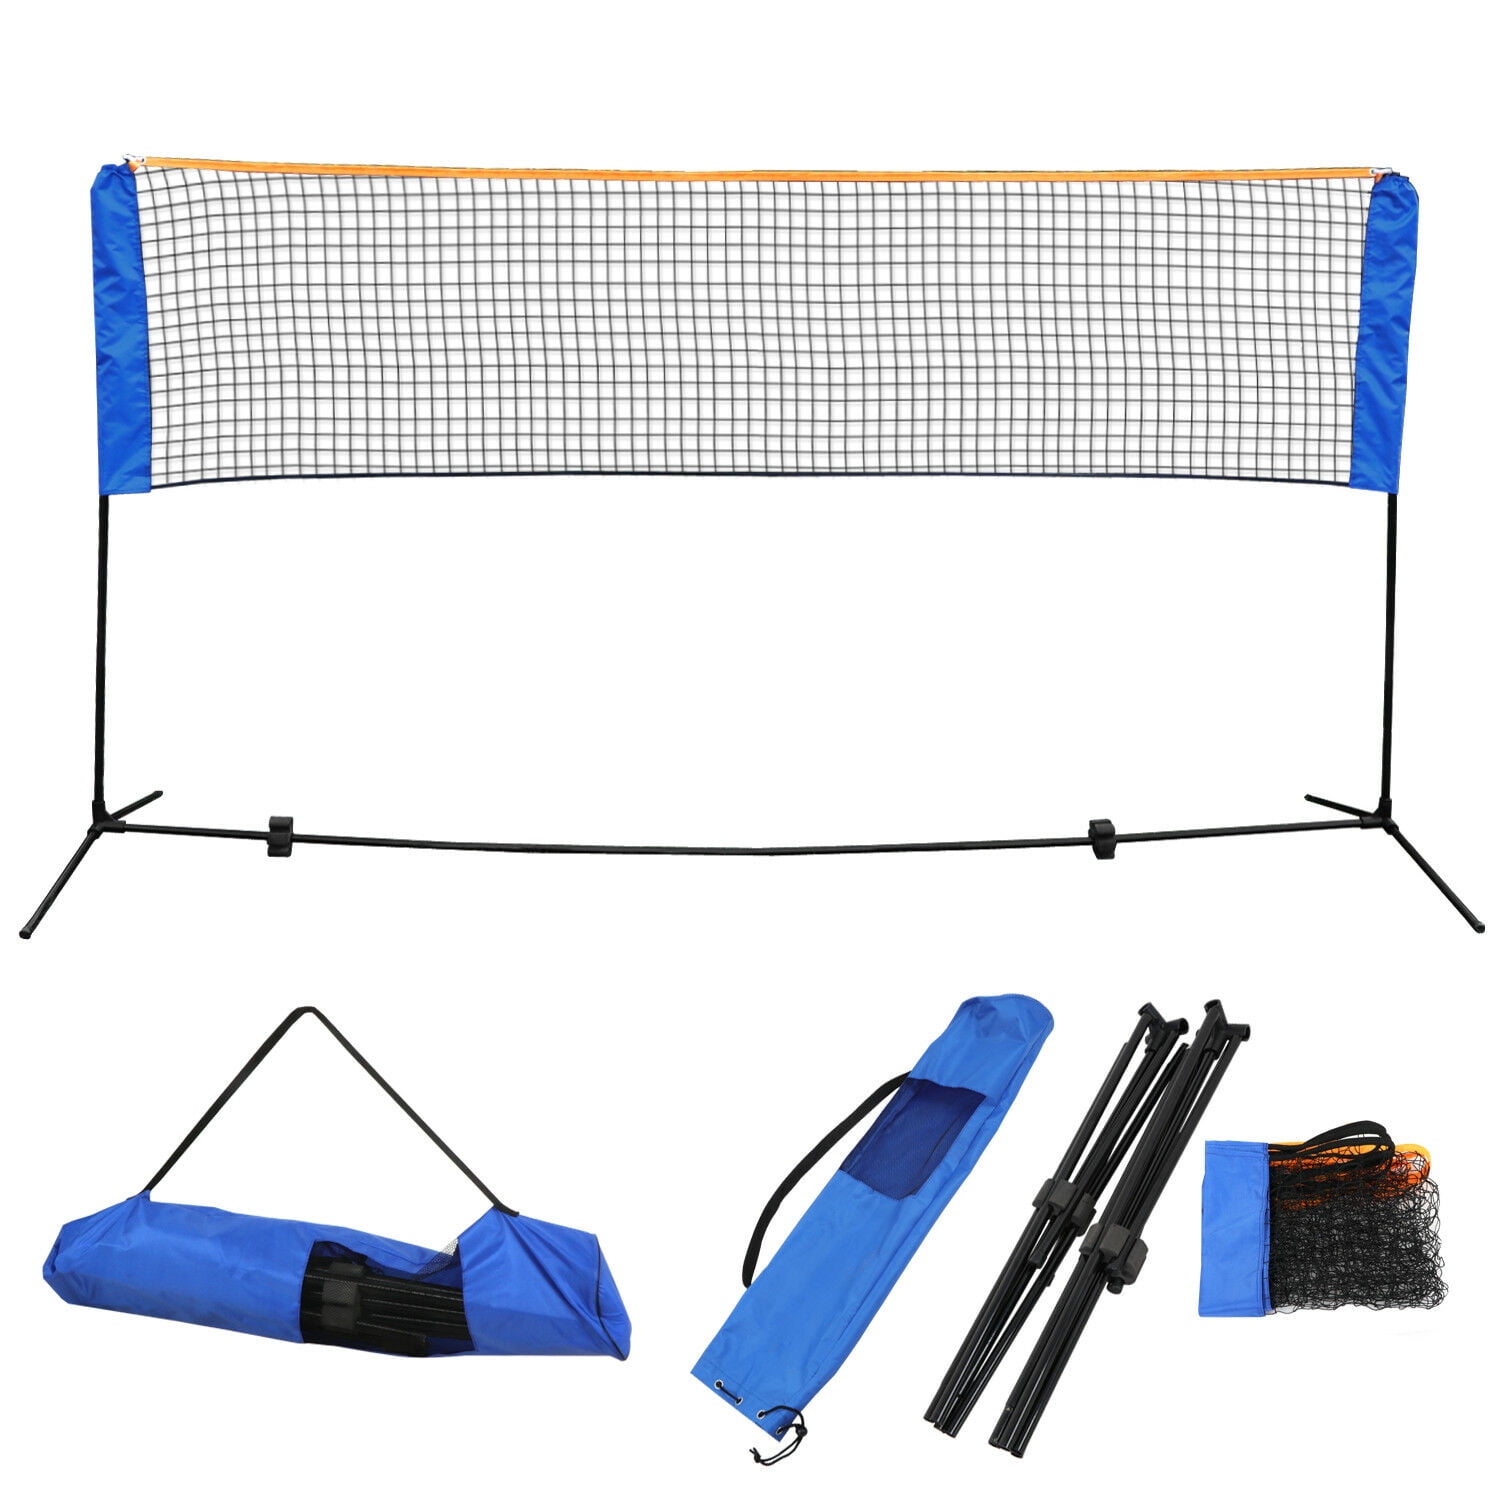 Details about   10 14 17 Feet Portable Badminton Volleyball Tennis Net Set with Carry Bag US 